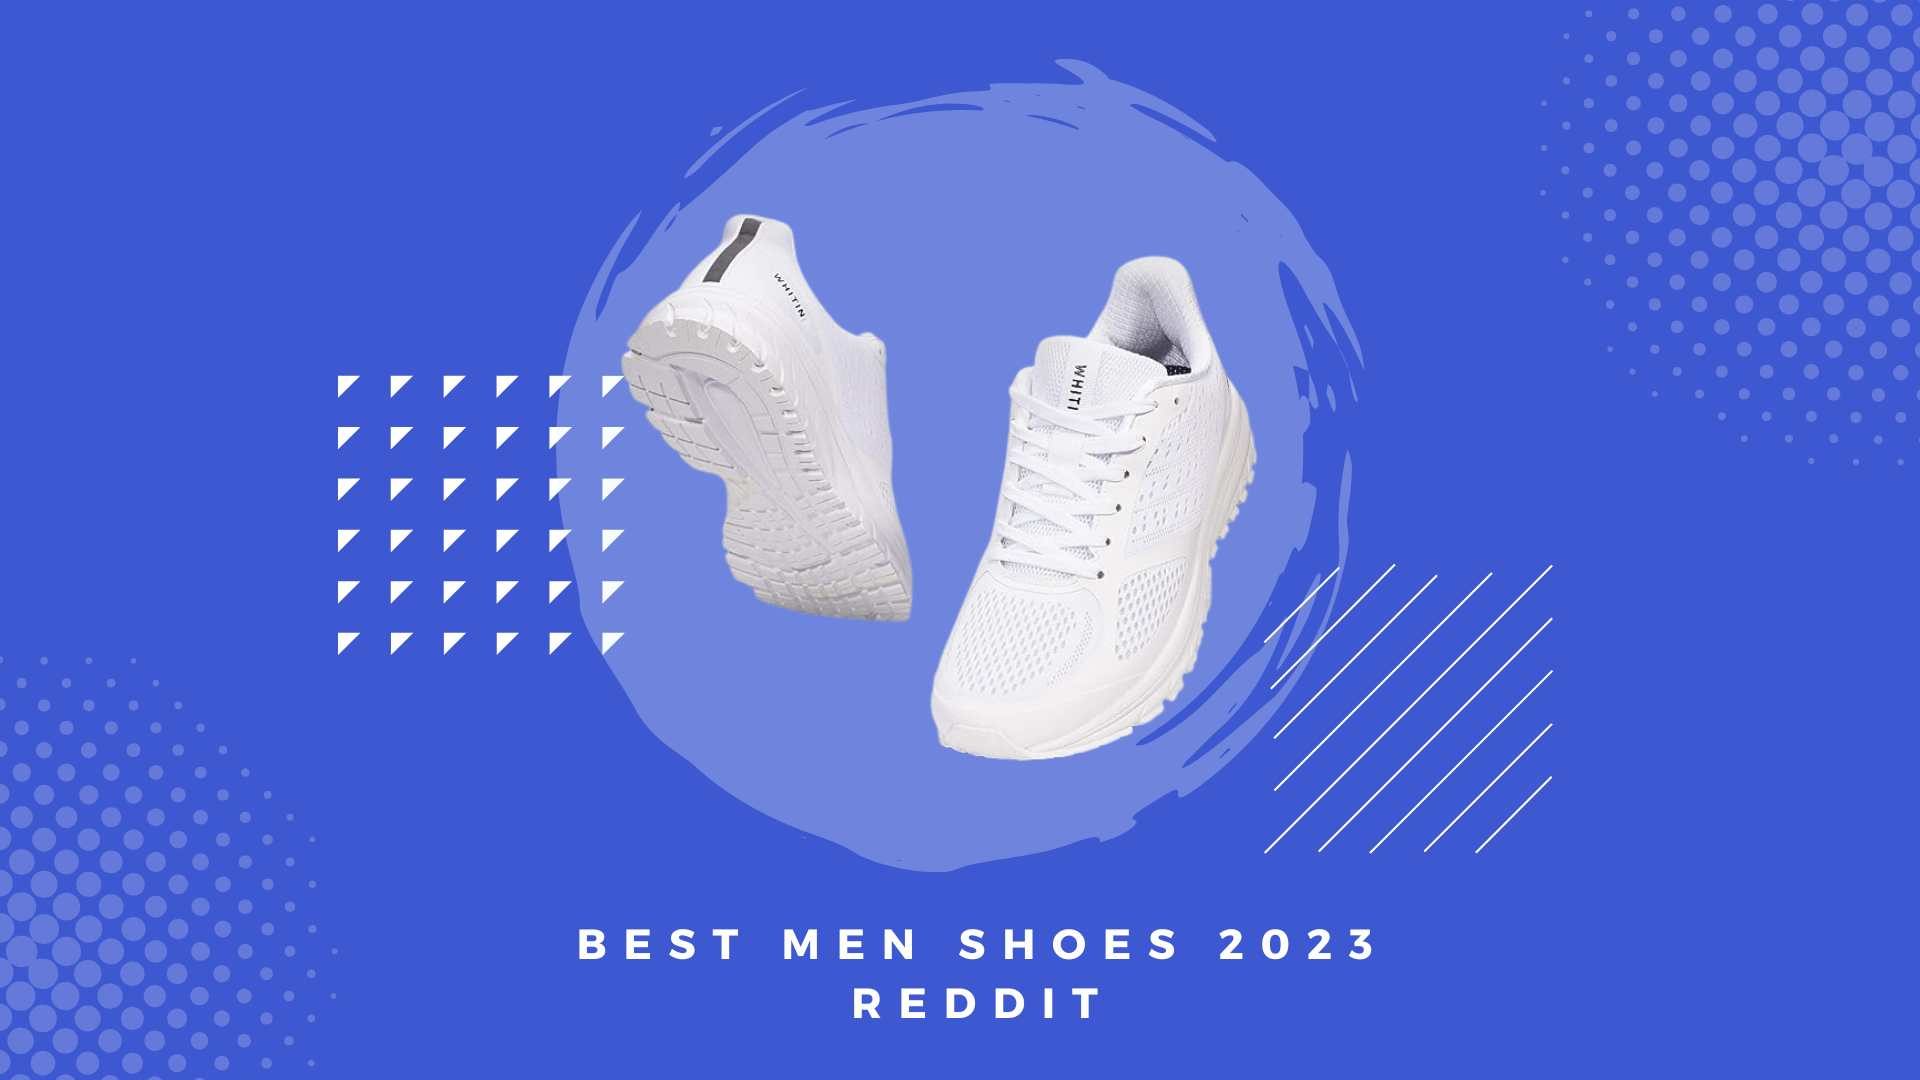 Best Men Shoes 2023 Reddit: Stepping into Style and Comfort